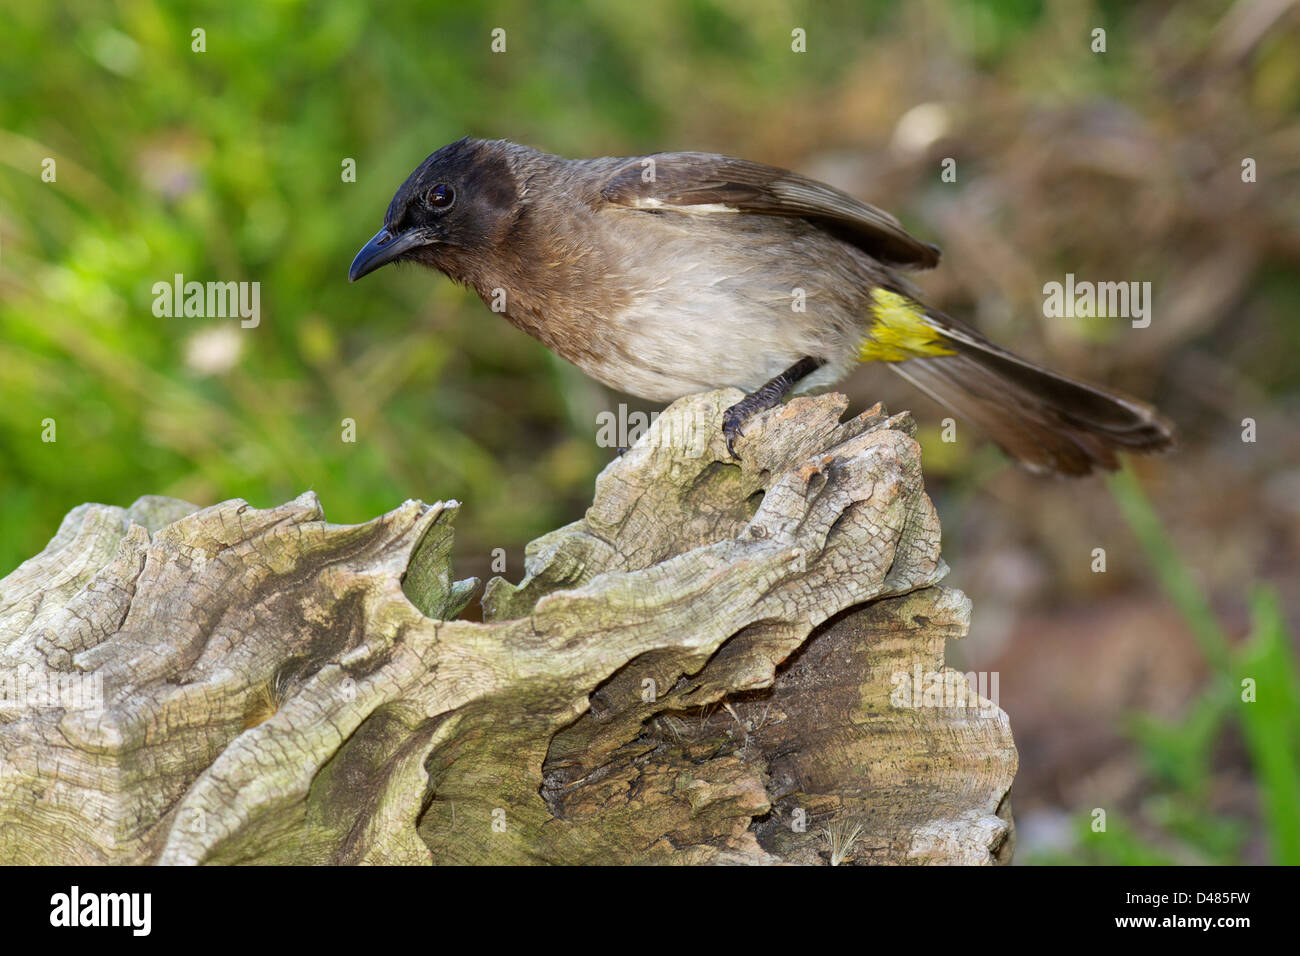 The Common or Dark-Capped Bulbul (Pycnonotus barbatus) is a ubiquitous resident breeder throughout Africa. Stock Photo